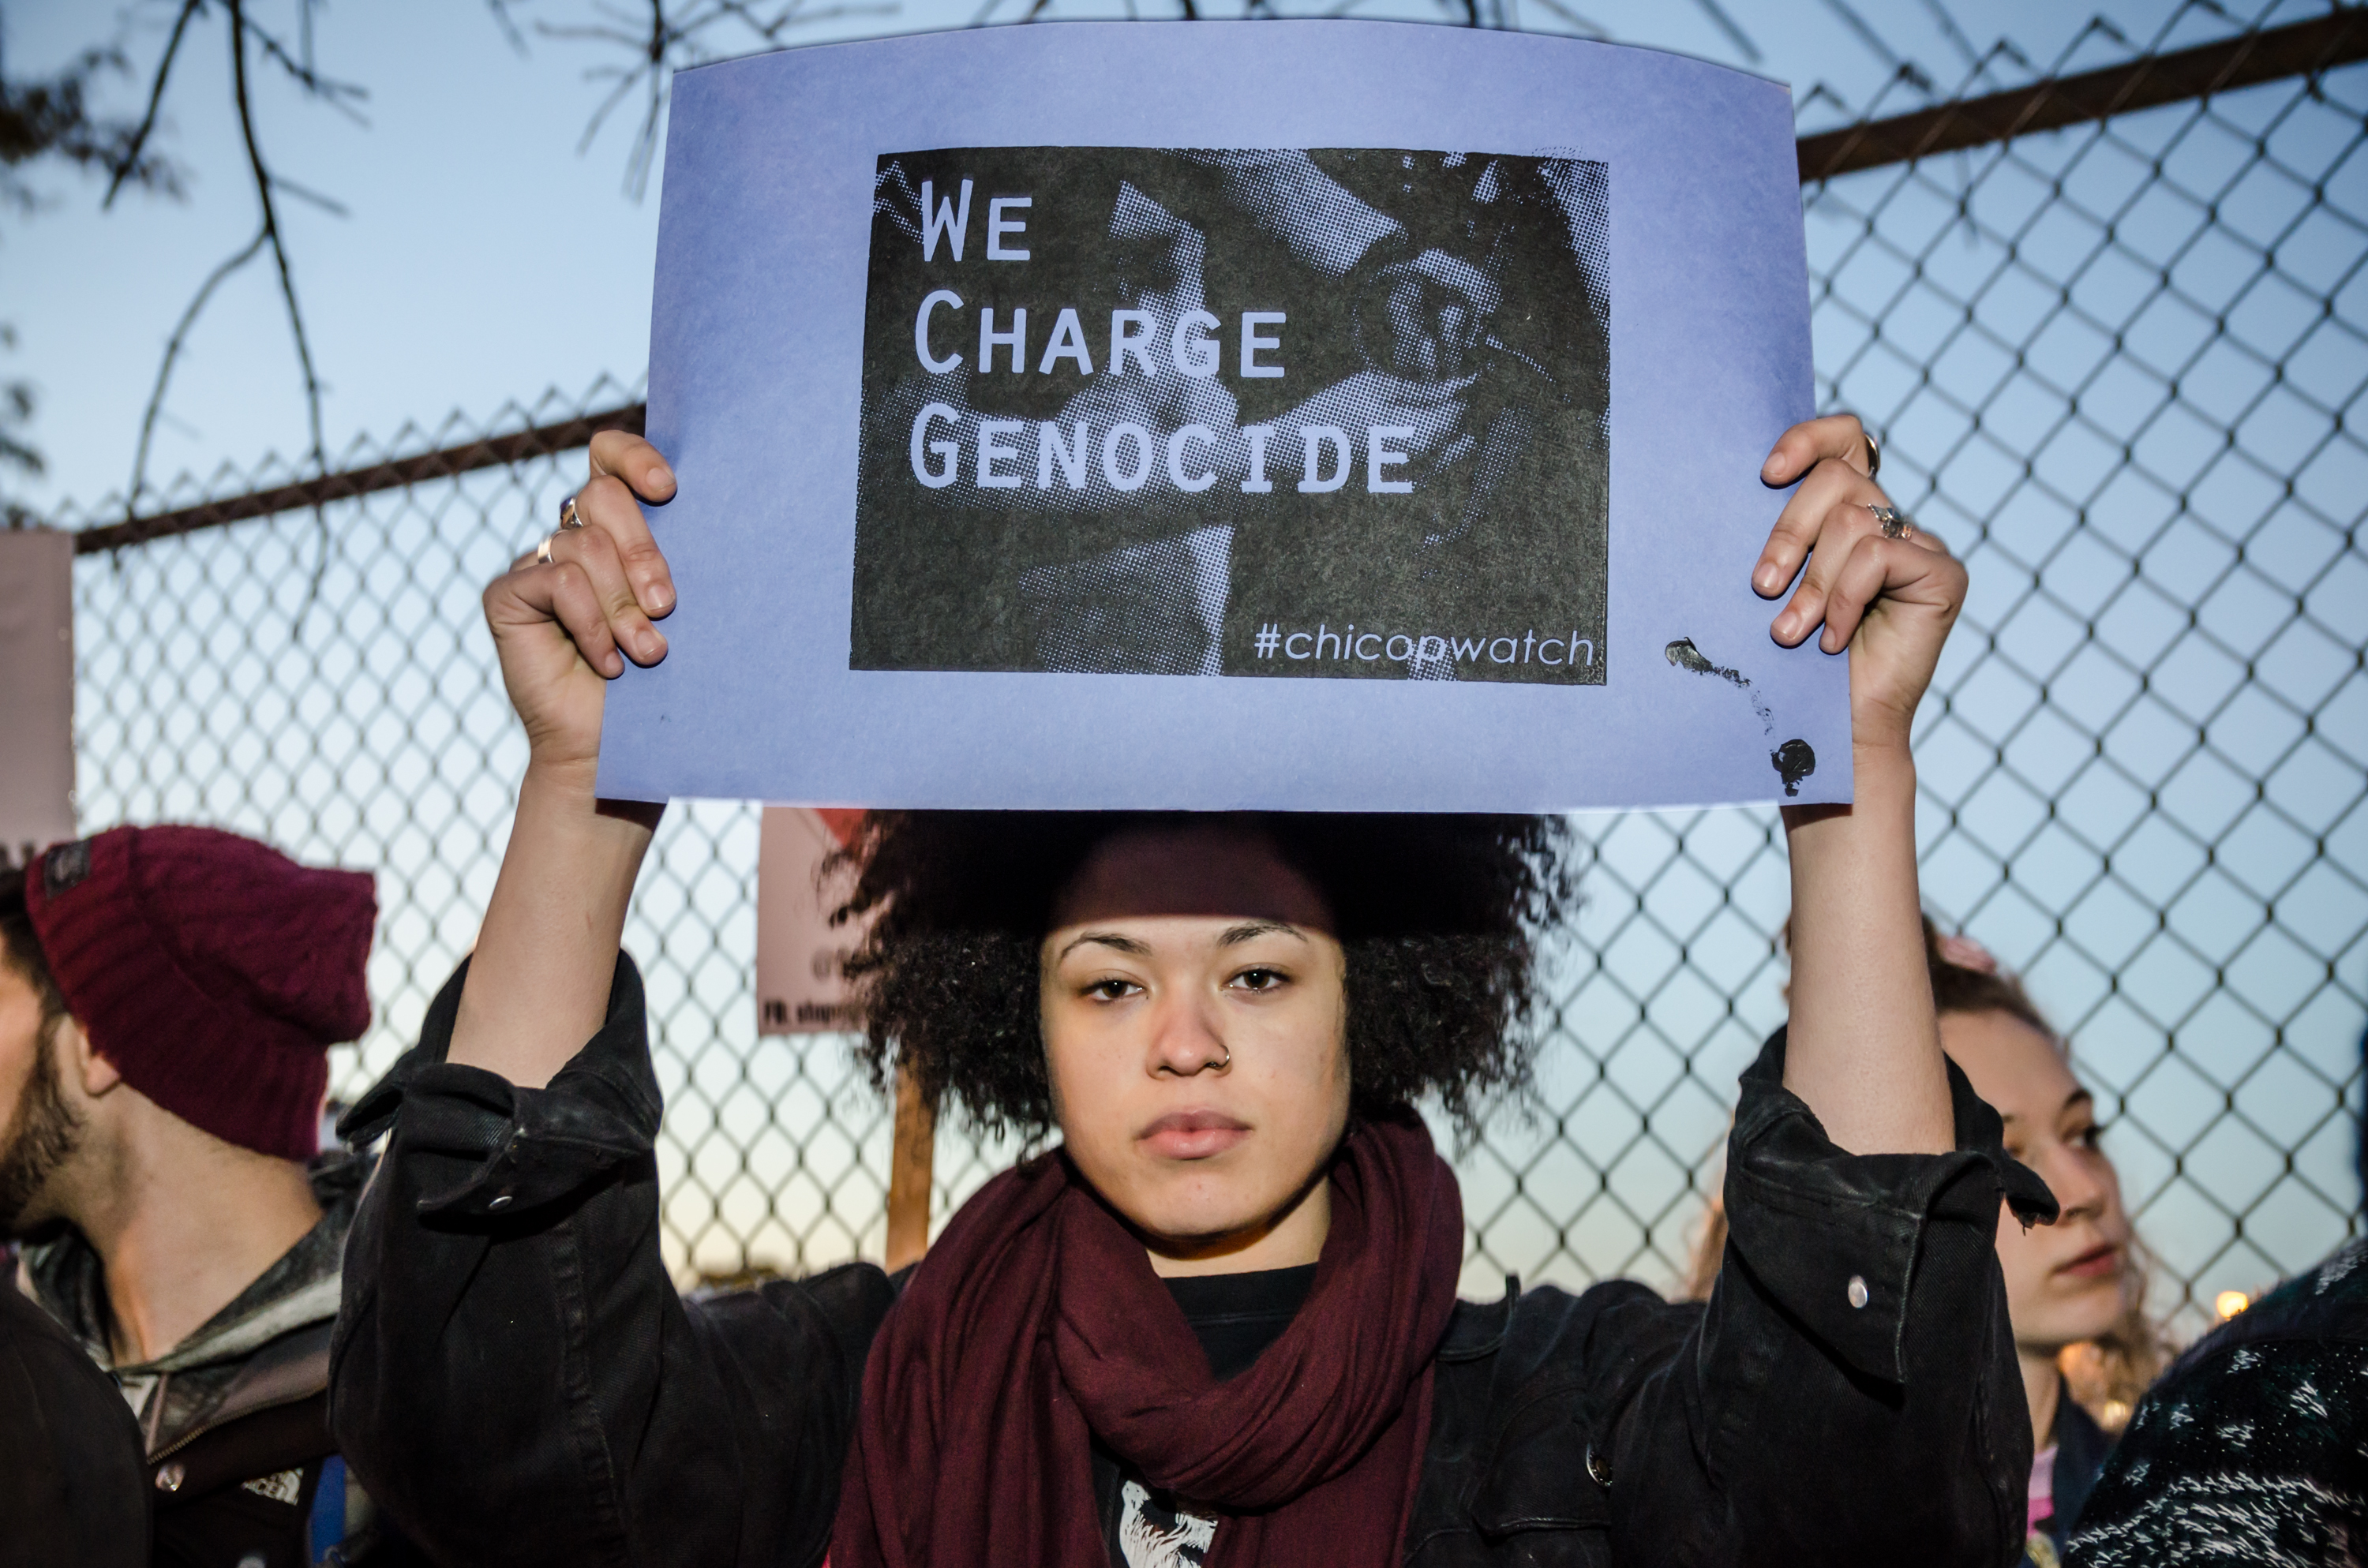 Image: A young person of color stands in front of a chain-link fence, looking directly at the camera. They are holding up a poster with an image that has the words “We Charge Genocide” super imposed in the center of the poster. The hashtag #chicopwatch is placed on the lower right corner of the poster. Photo taken October 22, 2014, at the Break Down the Wall of Silence Protest Against Police Brutality, organized by We Charge Genocide. Photo courtesy of the artist.